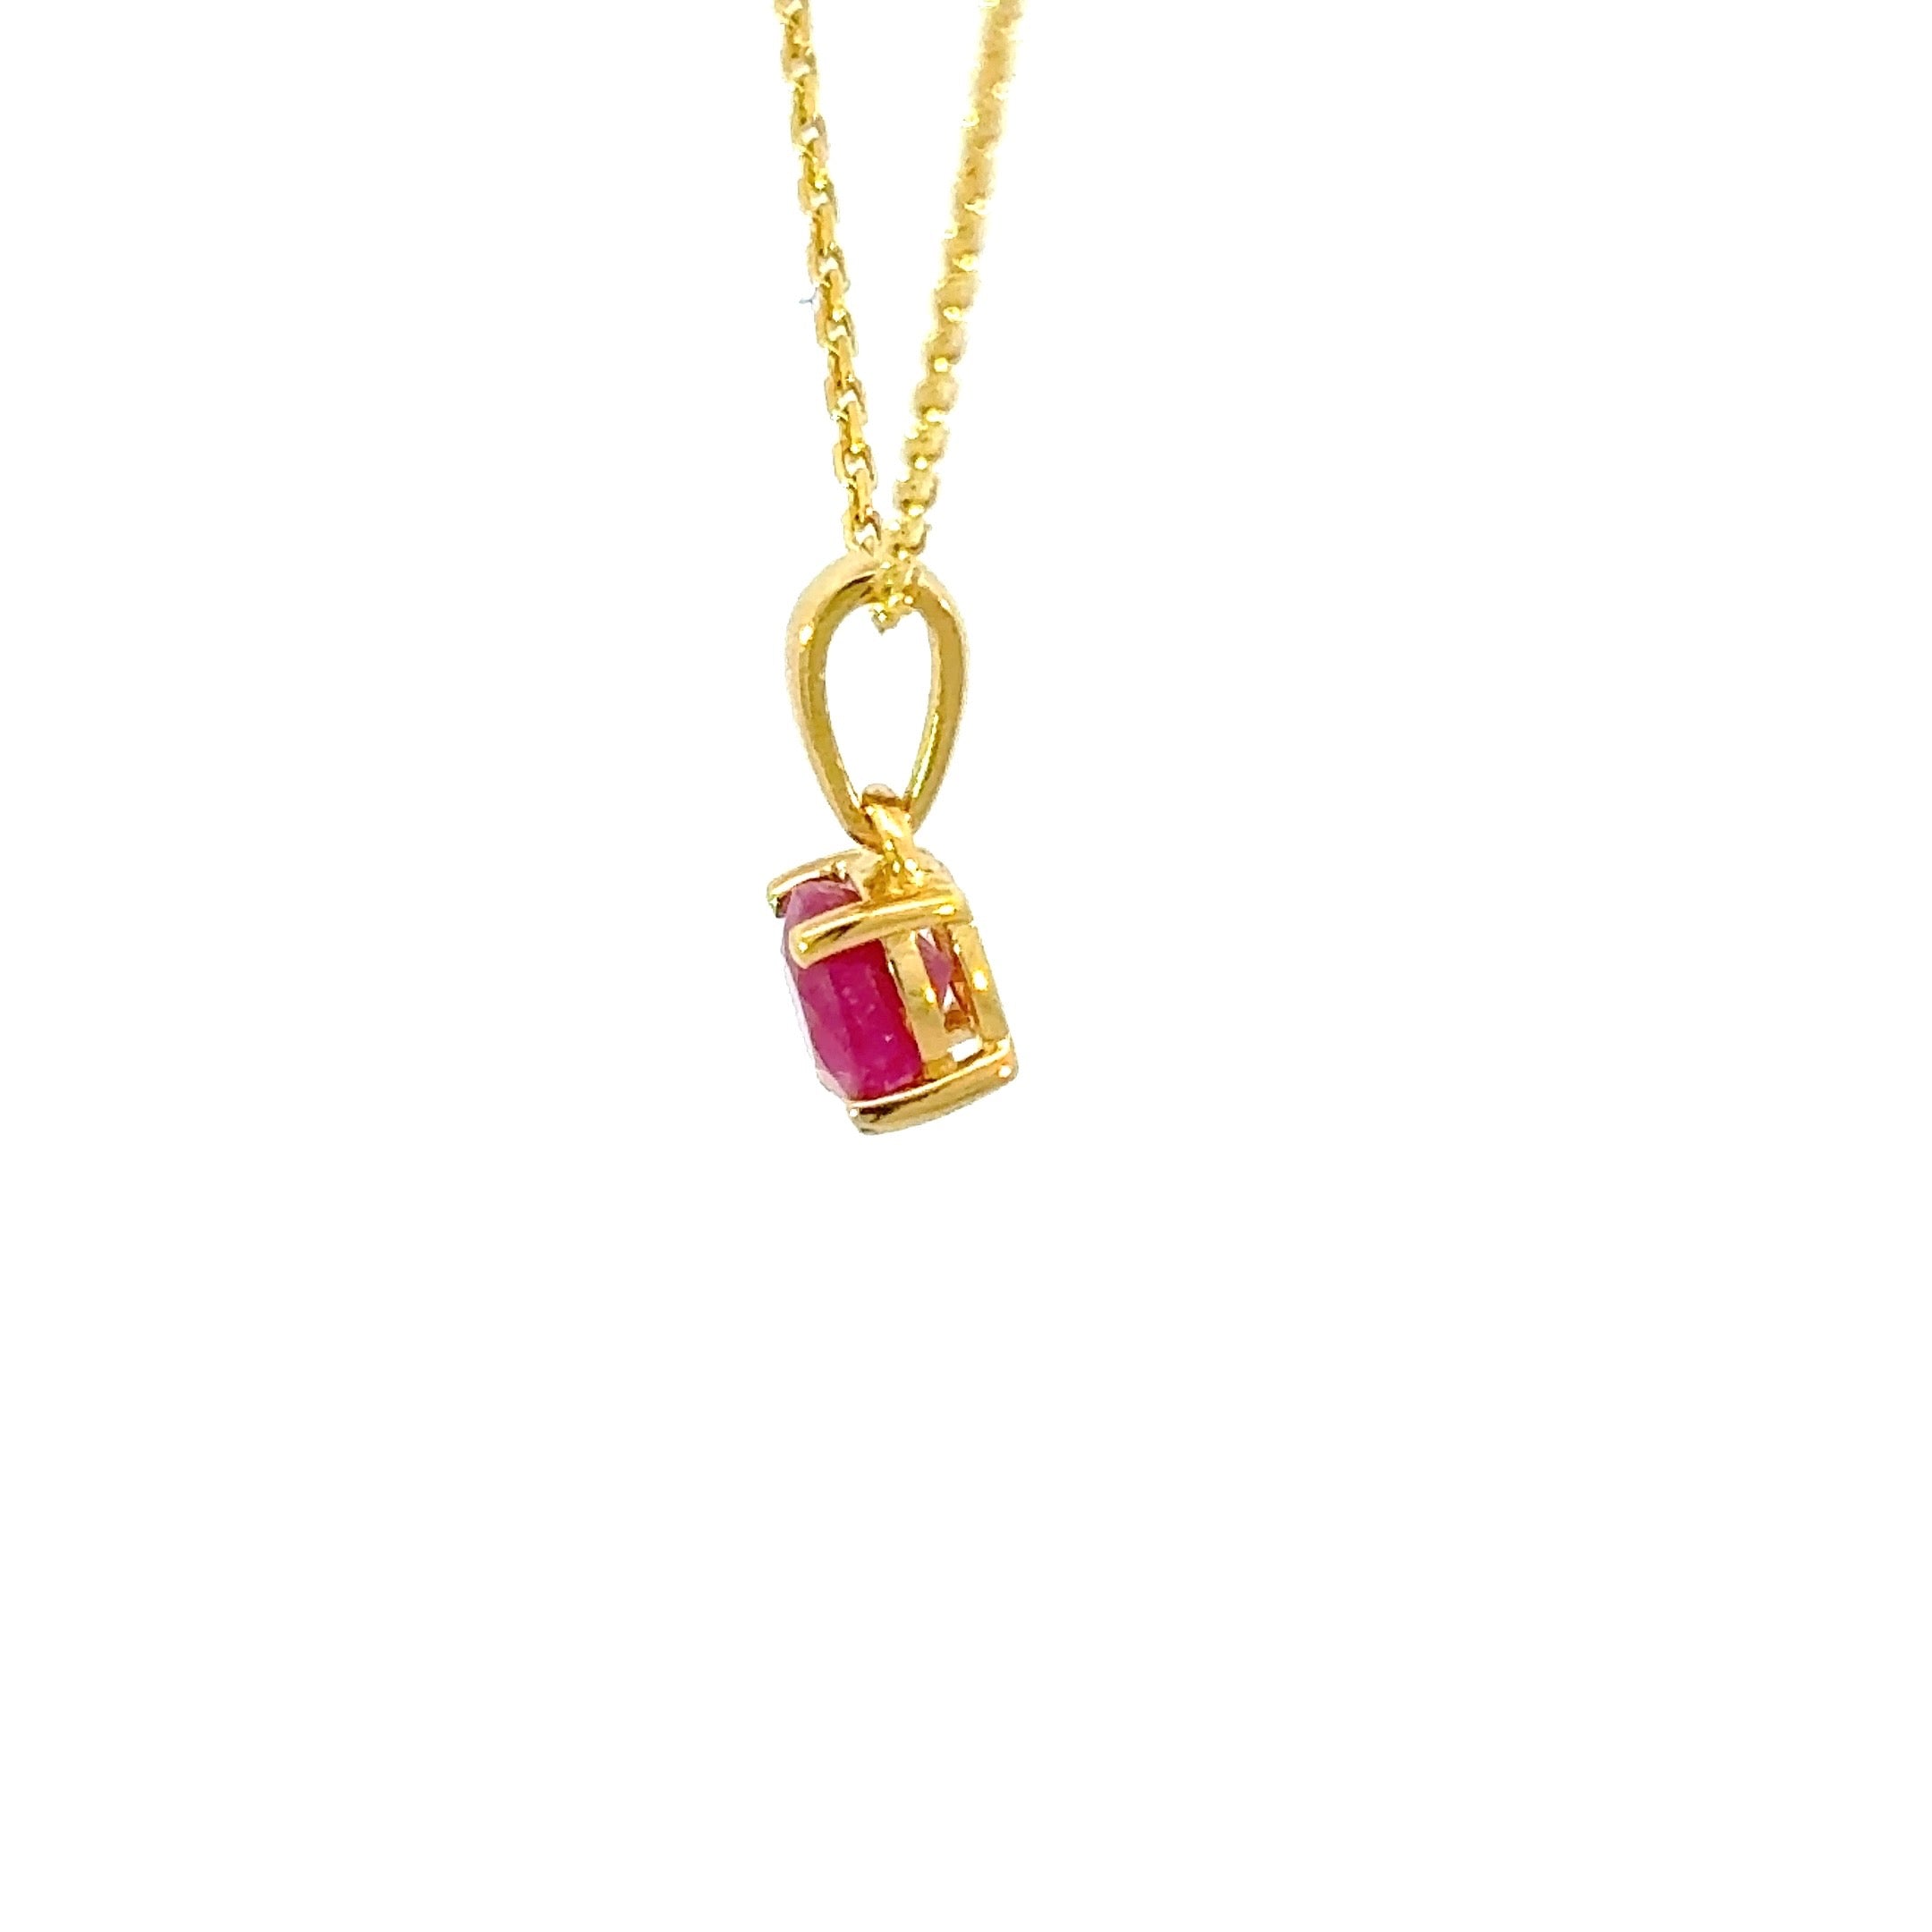 Round cut Ruby Pendant Necklace